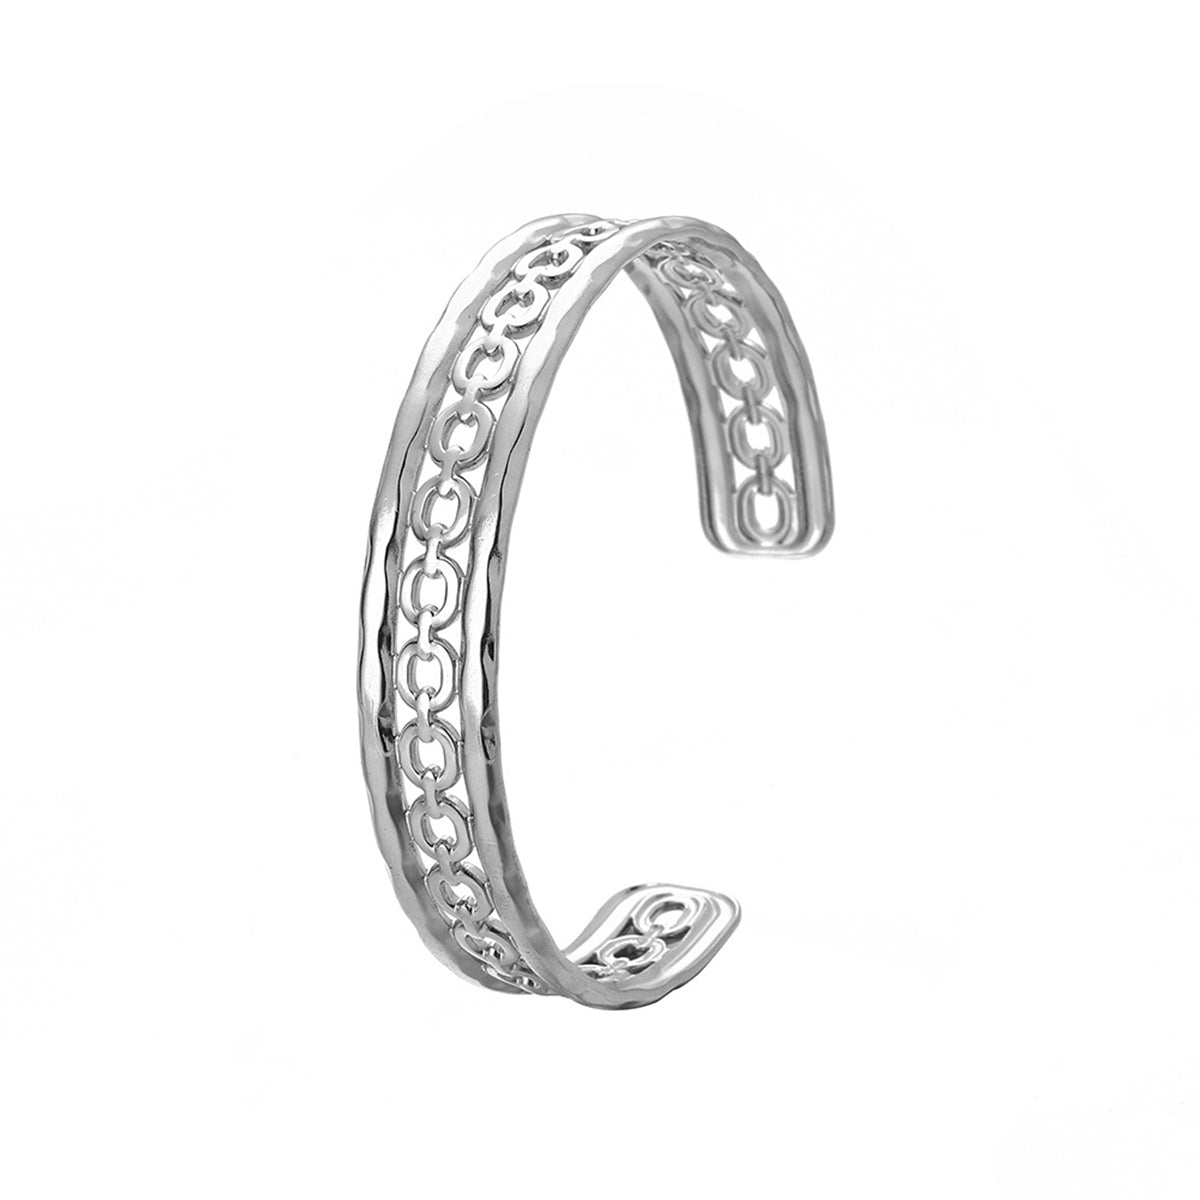 Stainless Steel Cable Cuff